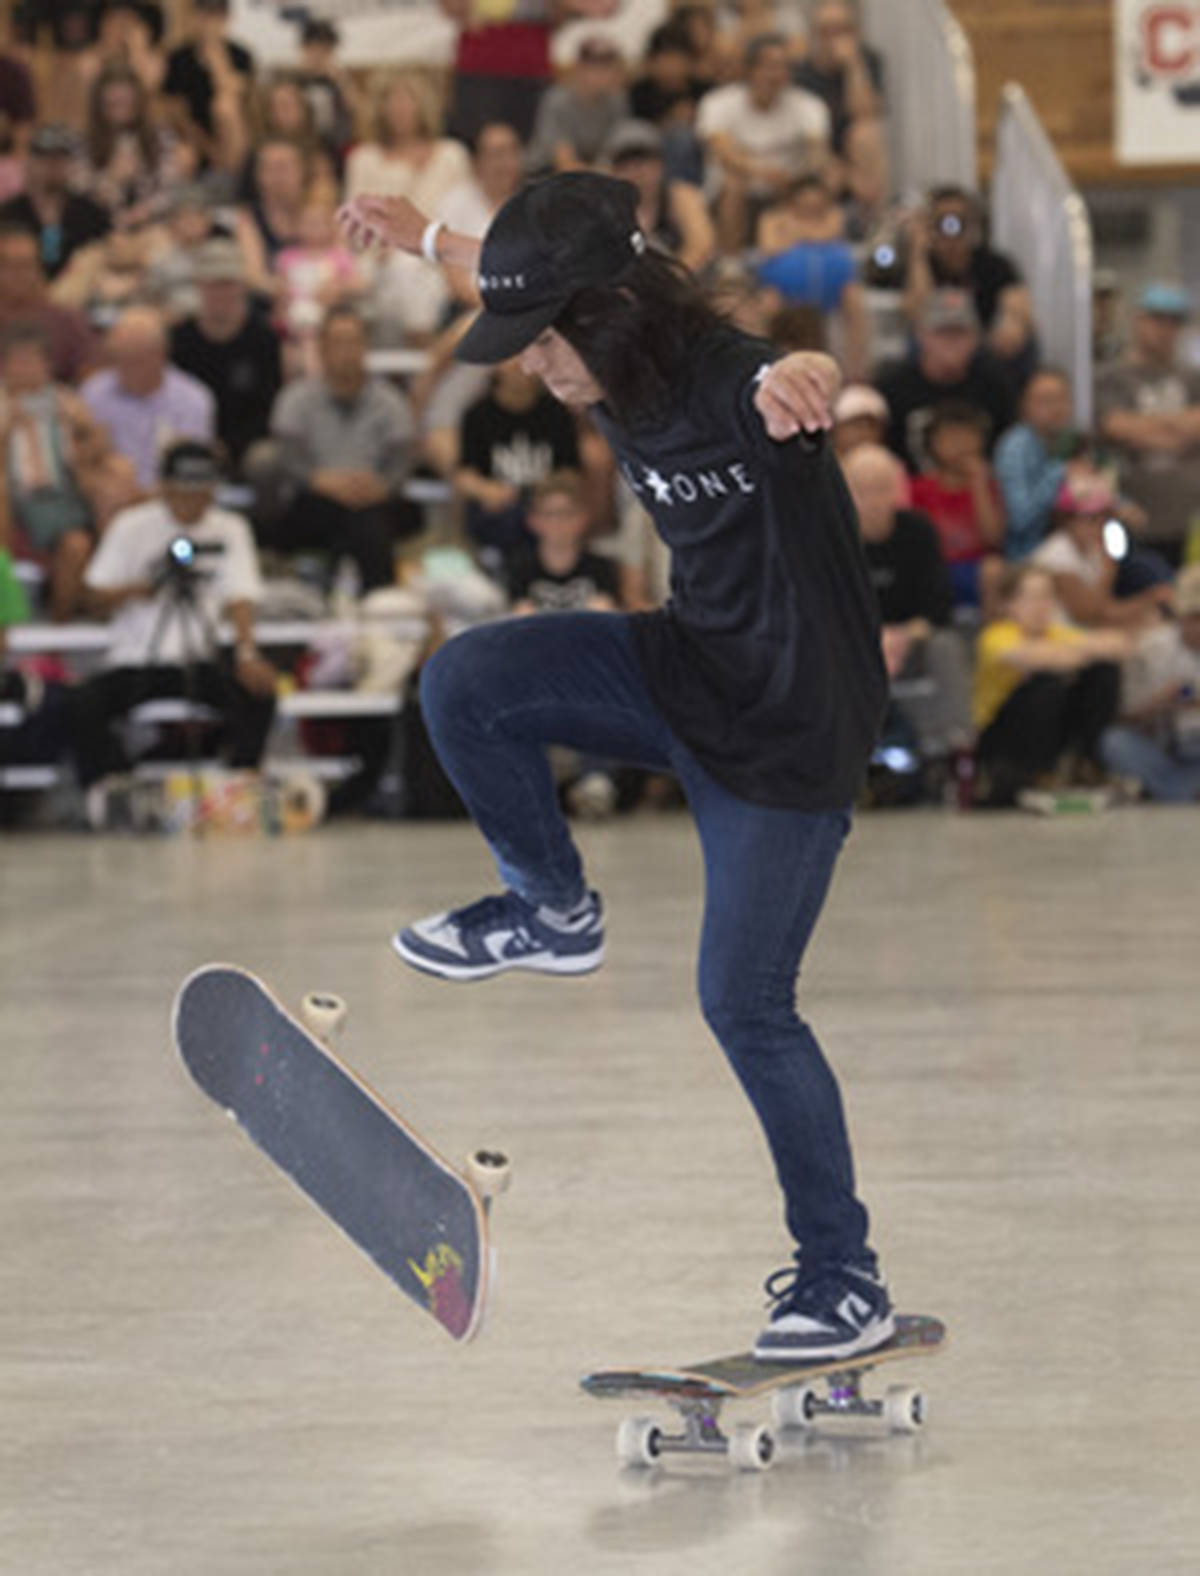 Its a game changer 15-year-old wins pro skateboarding contest on two skateboards